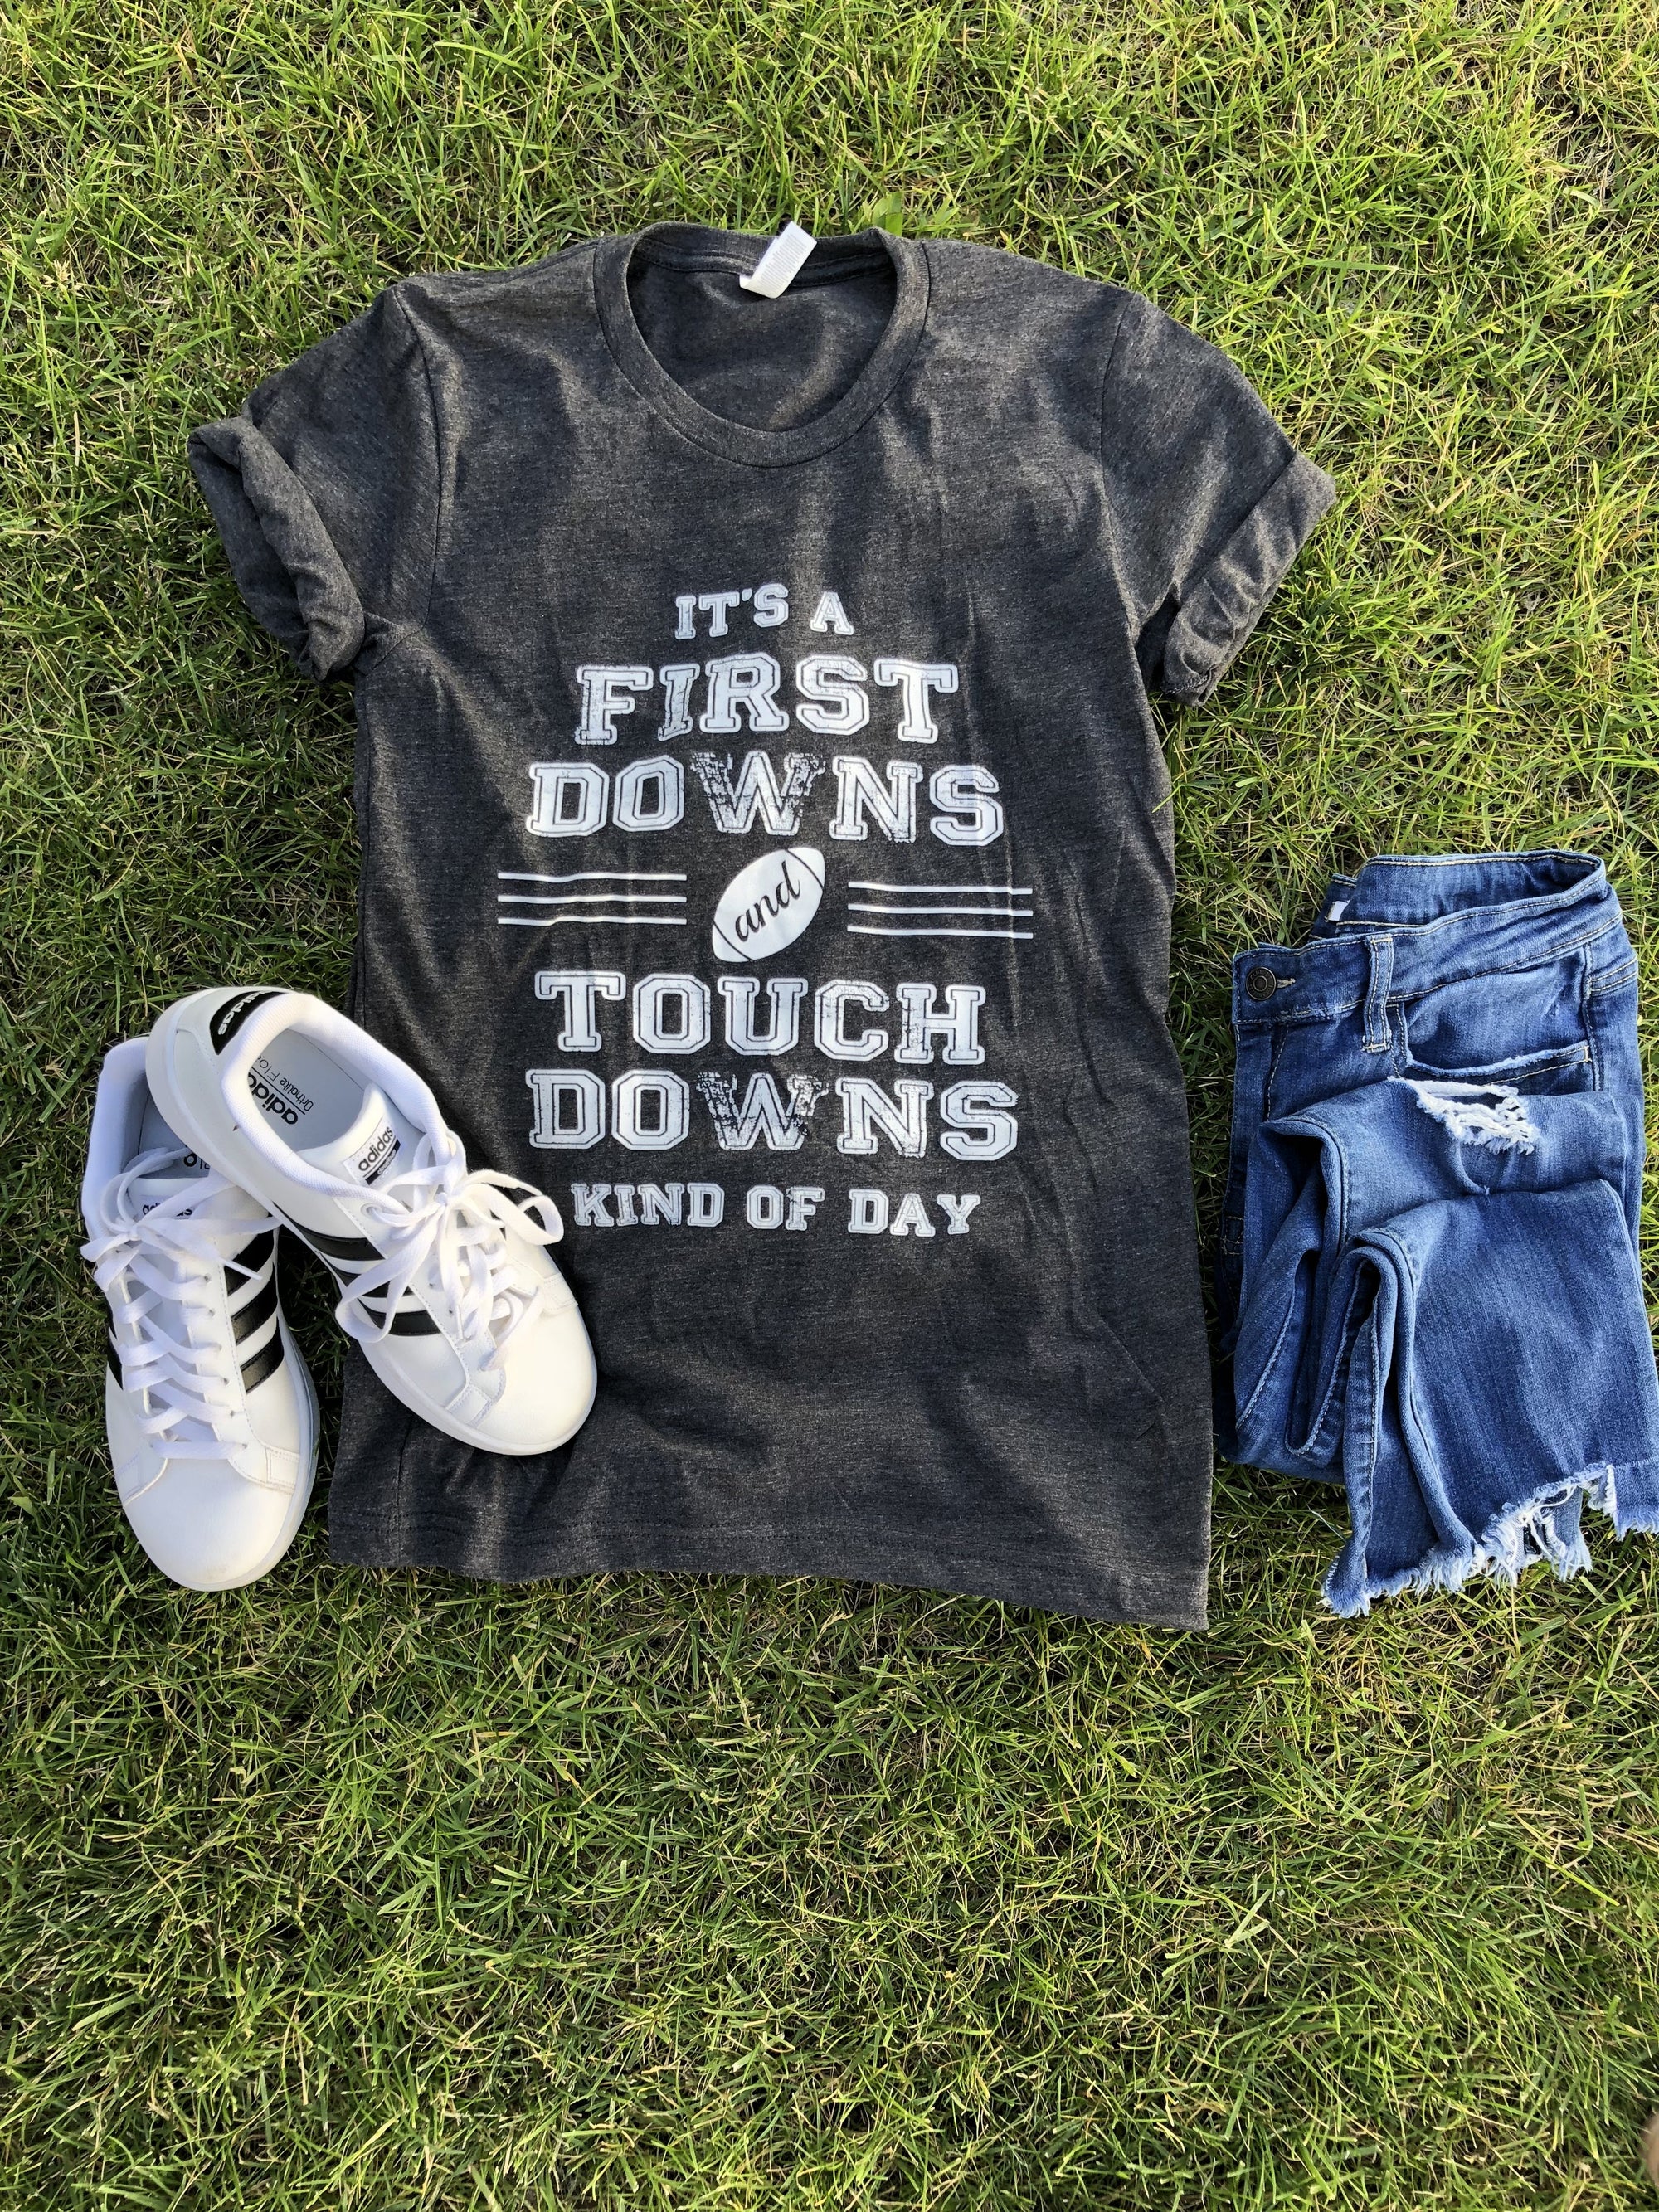 First downs and touchdowns kids tee Short sleeve kids tees Bella canvas 3001y 2t Charcoal 